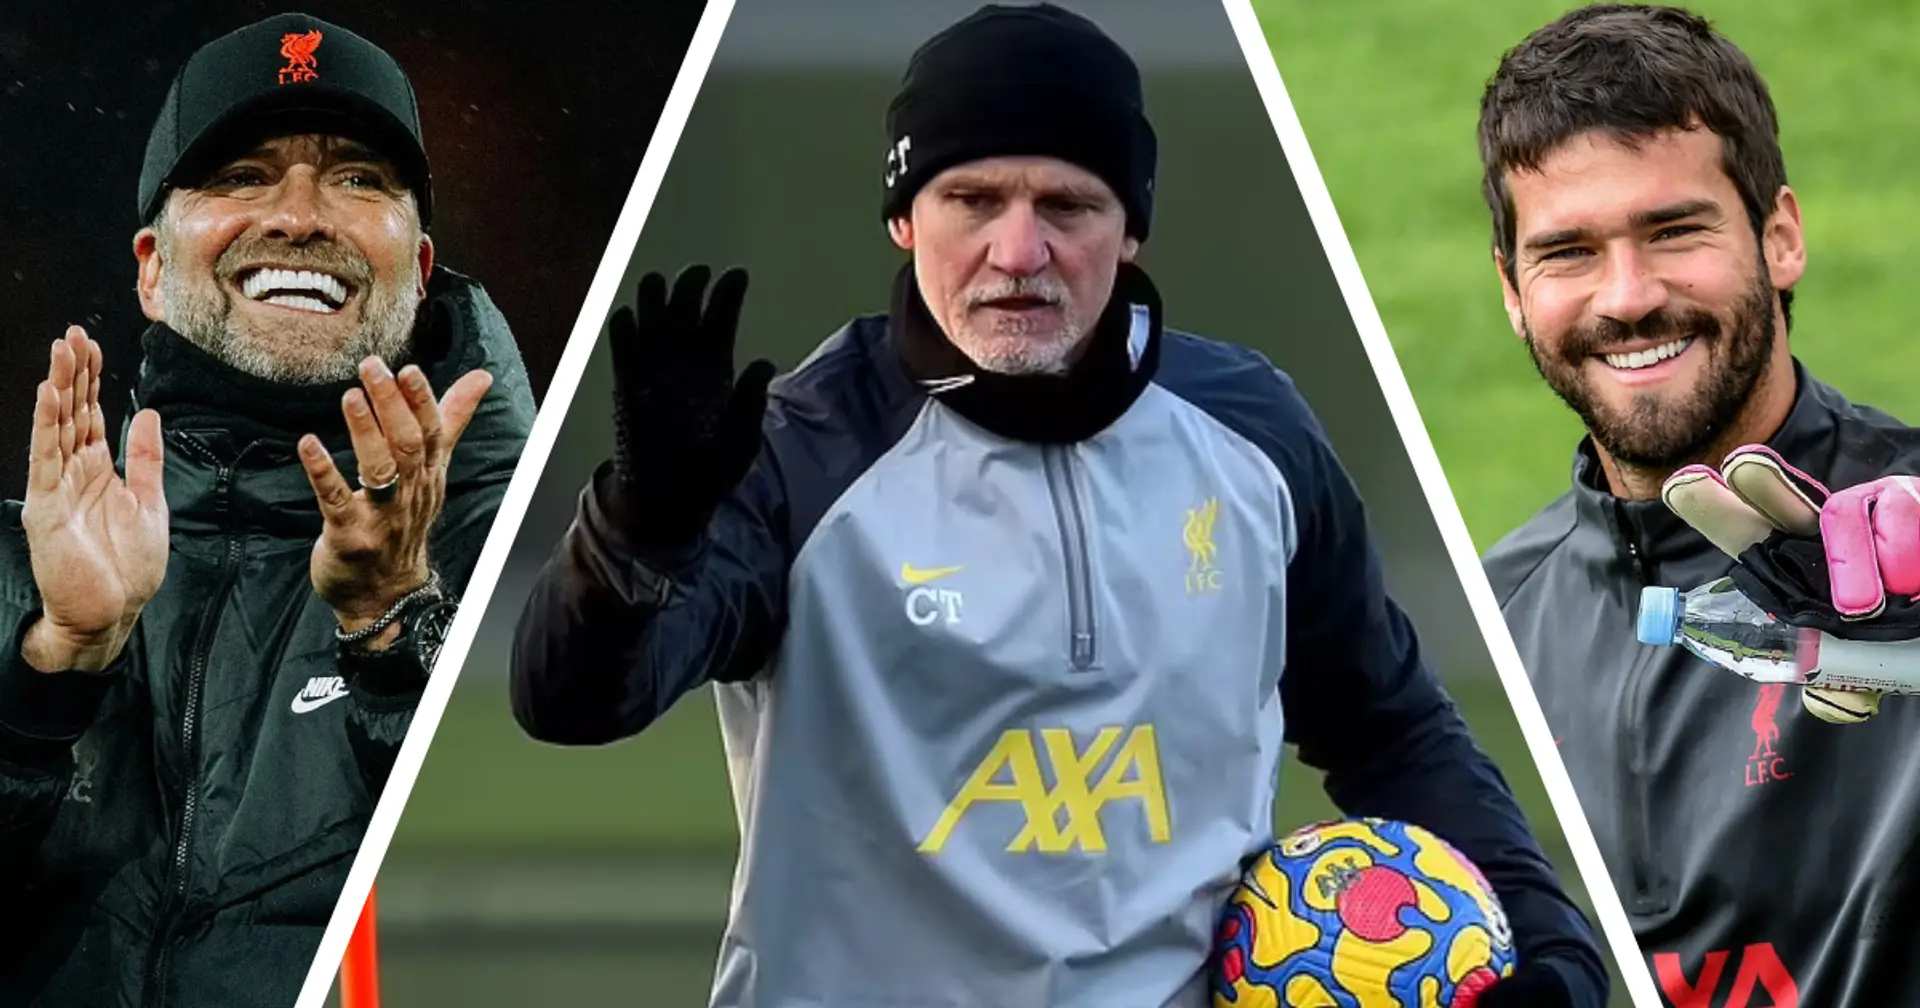 'He told me years ago': New goalkeeping coach Taffarel reveals Alisson and Klopp's roles in his LFC arrival